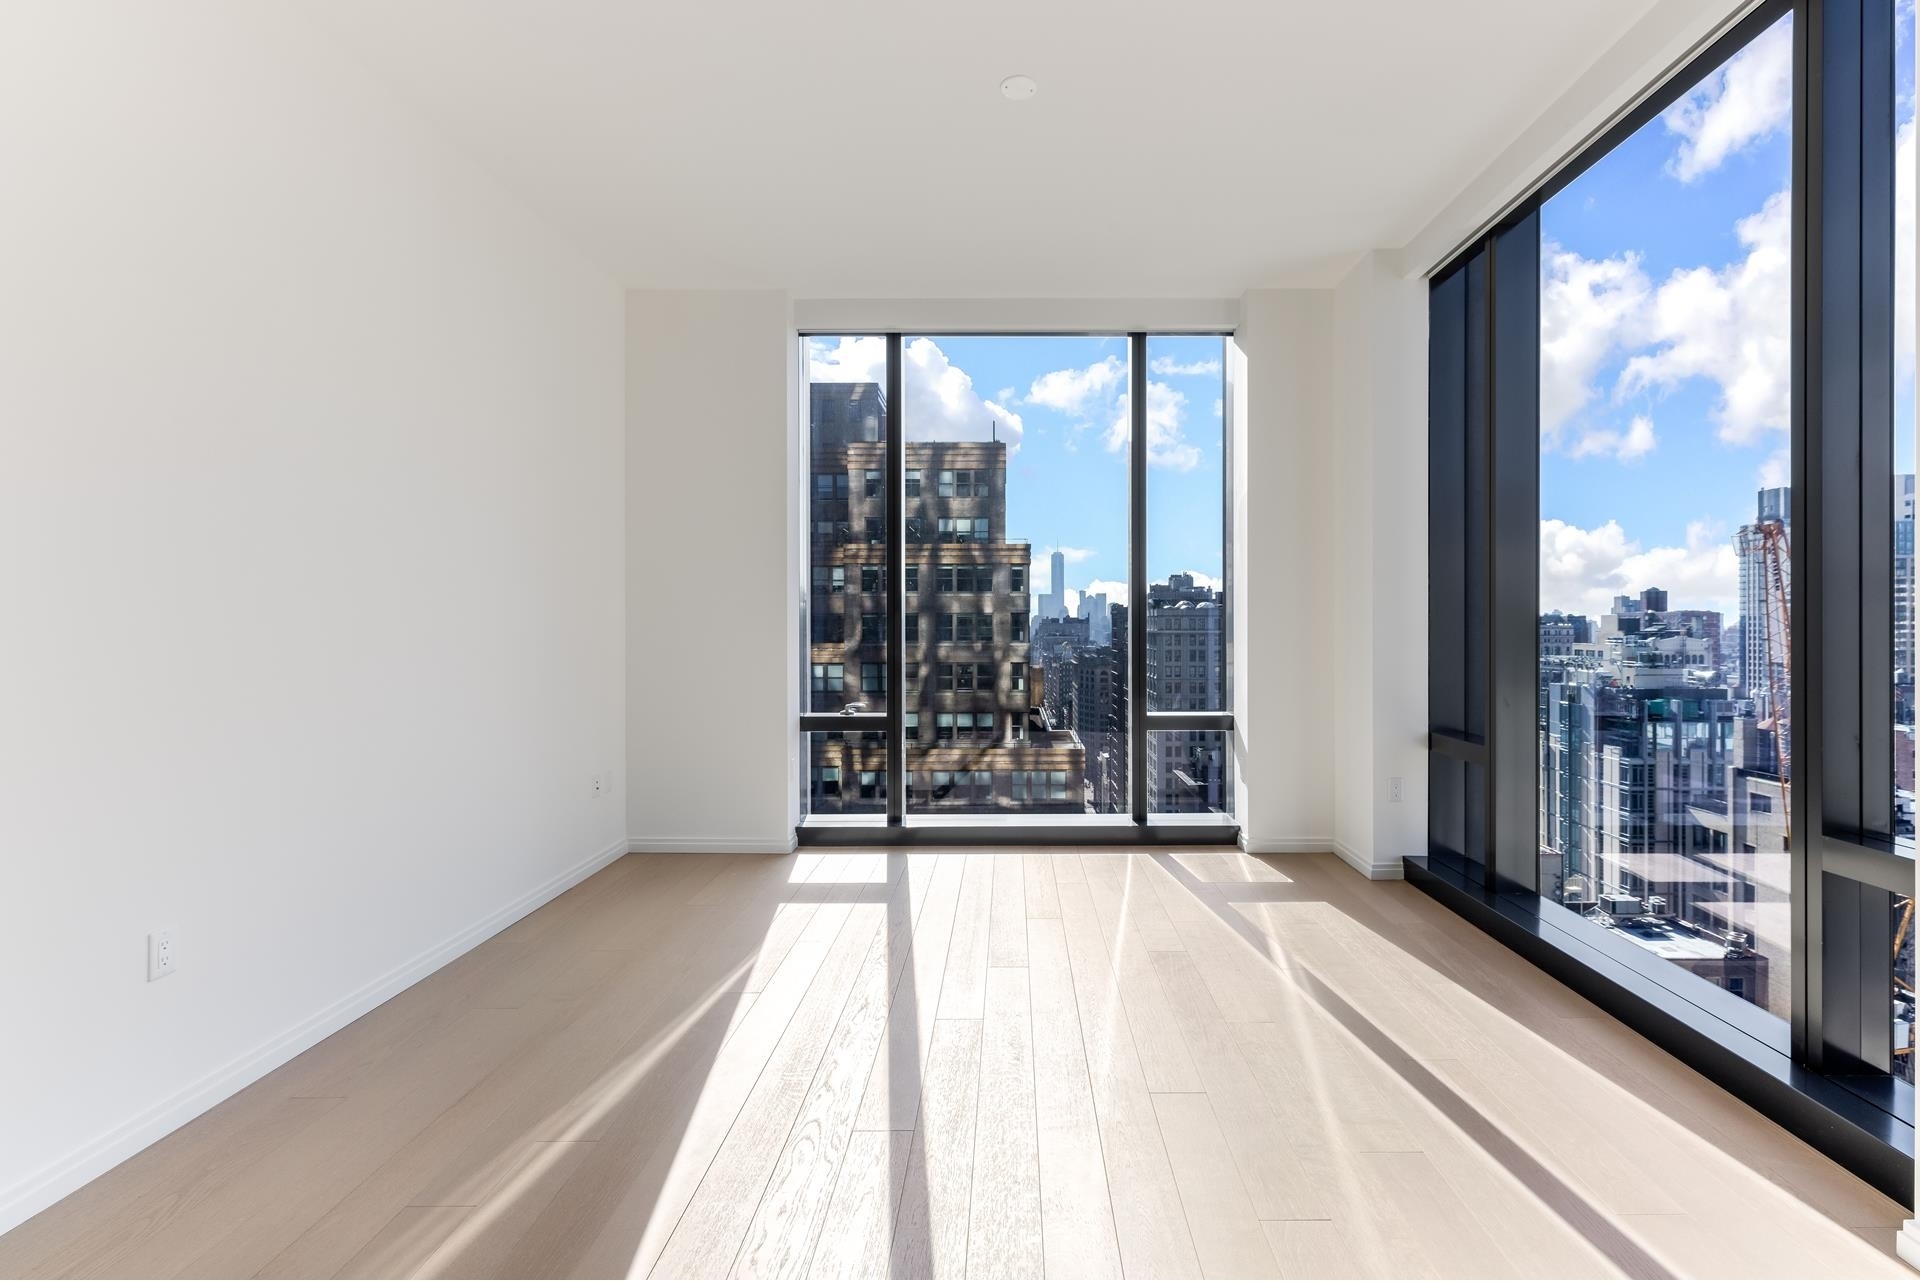 2. Condominiums for Sale at 277 FIFTH AVE, 26D NoMad, New York, NY 10016